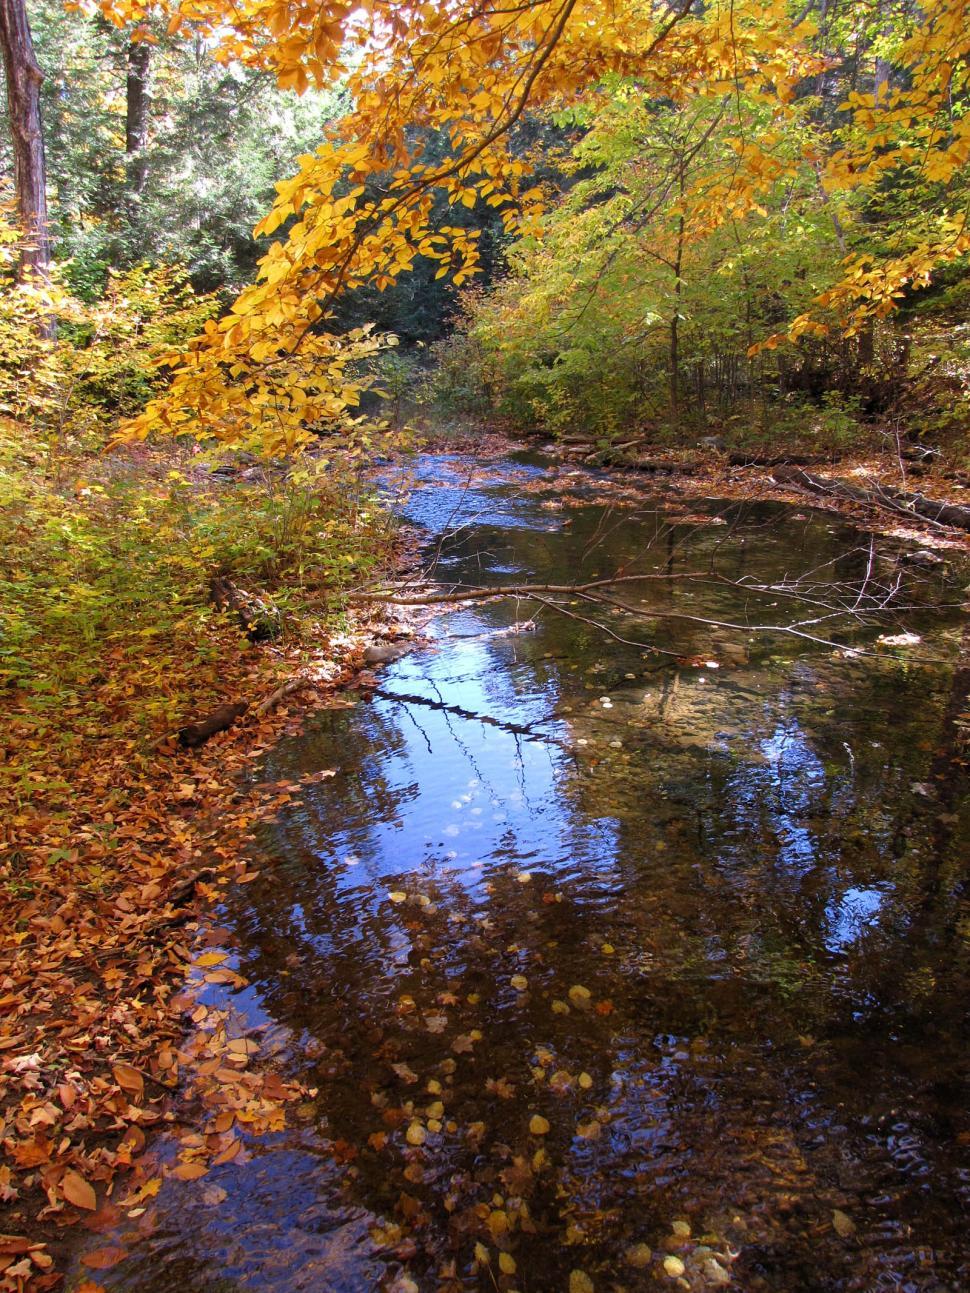 Free Image of Small Creek Surrounded by Trees and Leaves 